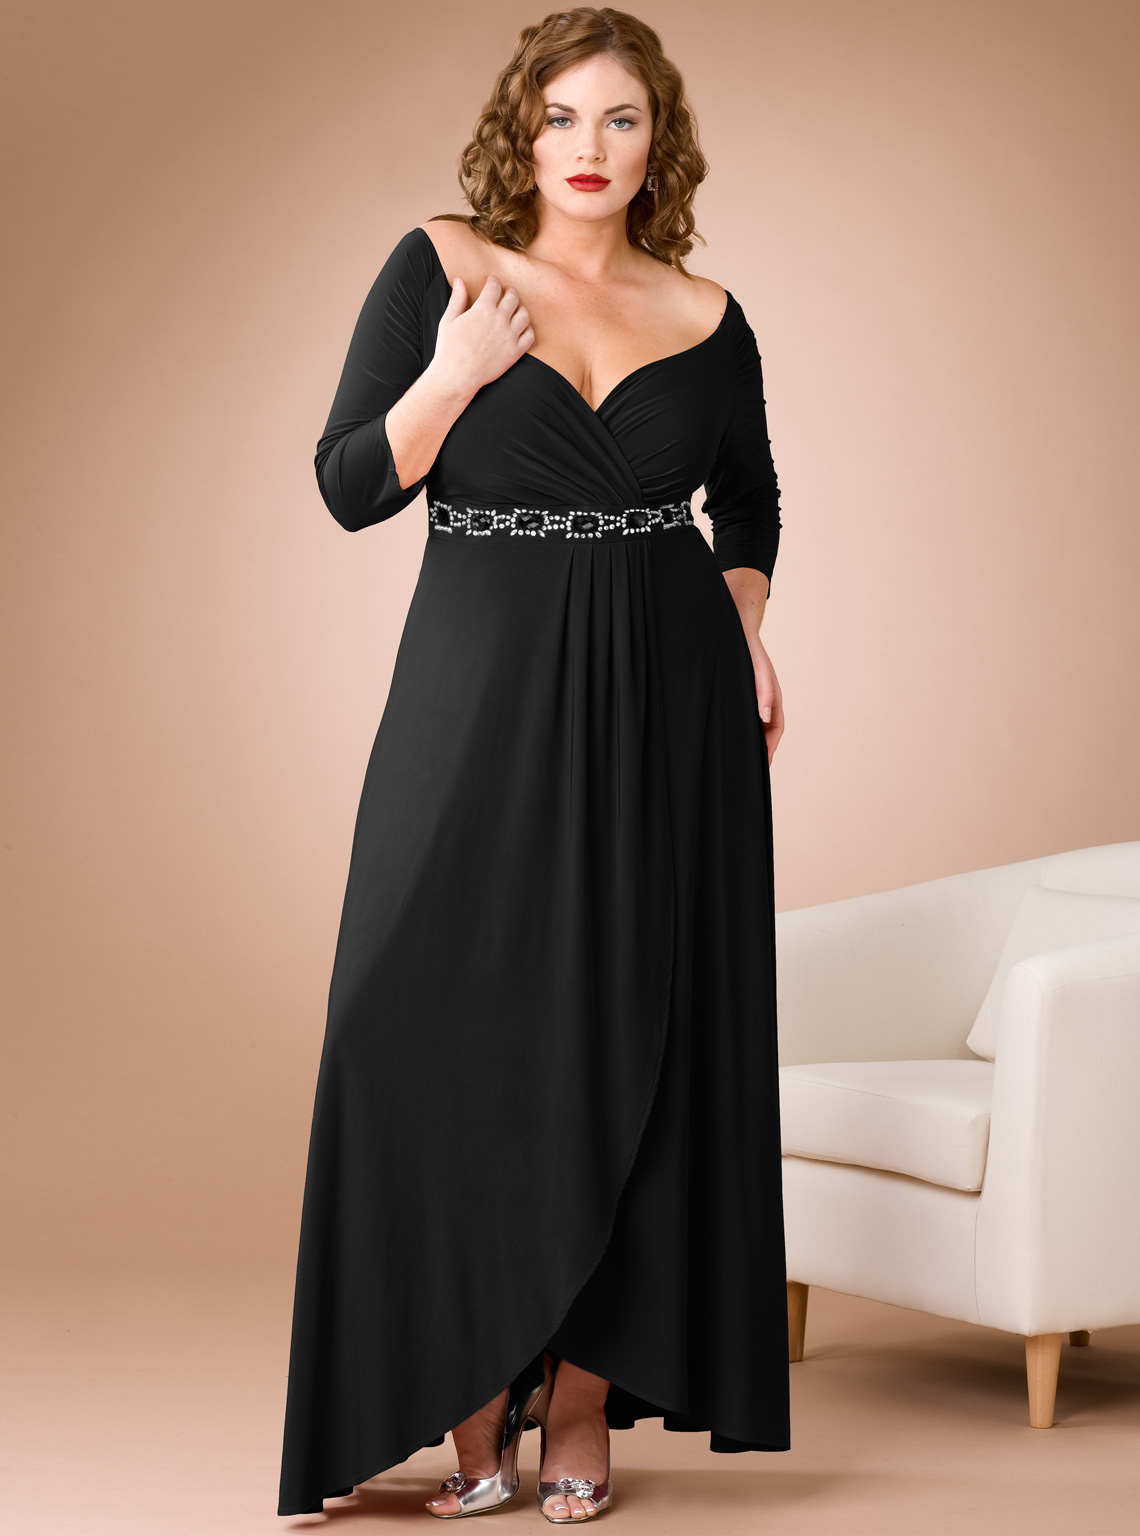 Download this Plus Size Dresses Cocktail Party picture